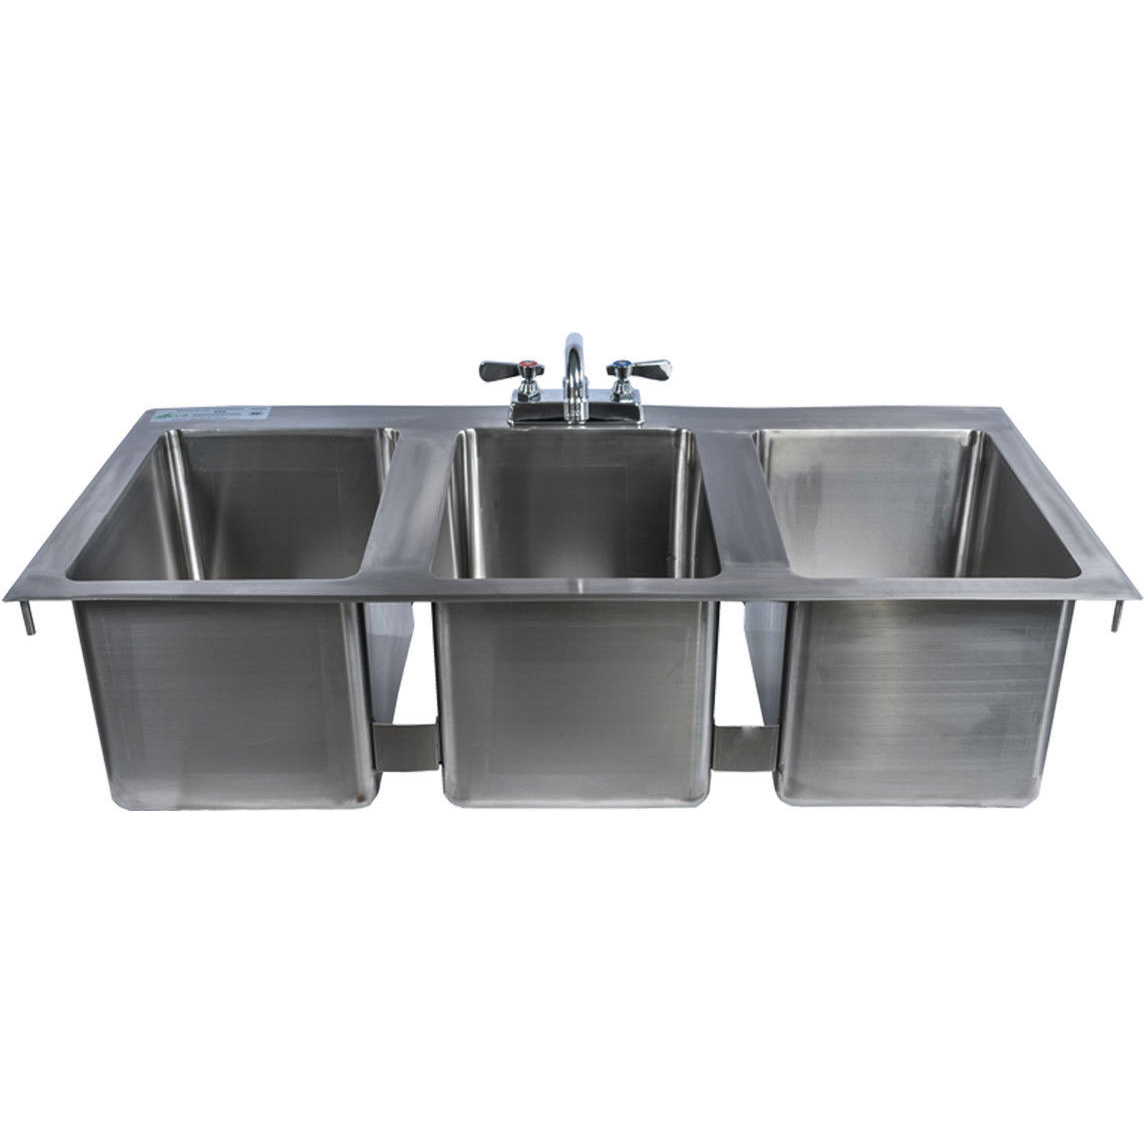 Stainless Steel 3 Compartment Drop In Sink 37 X 19 With Faucet Drains